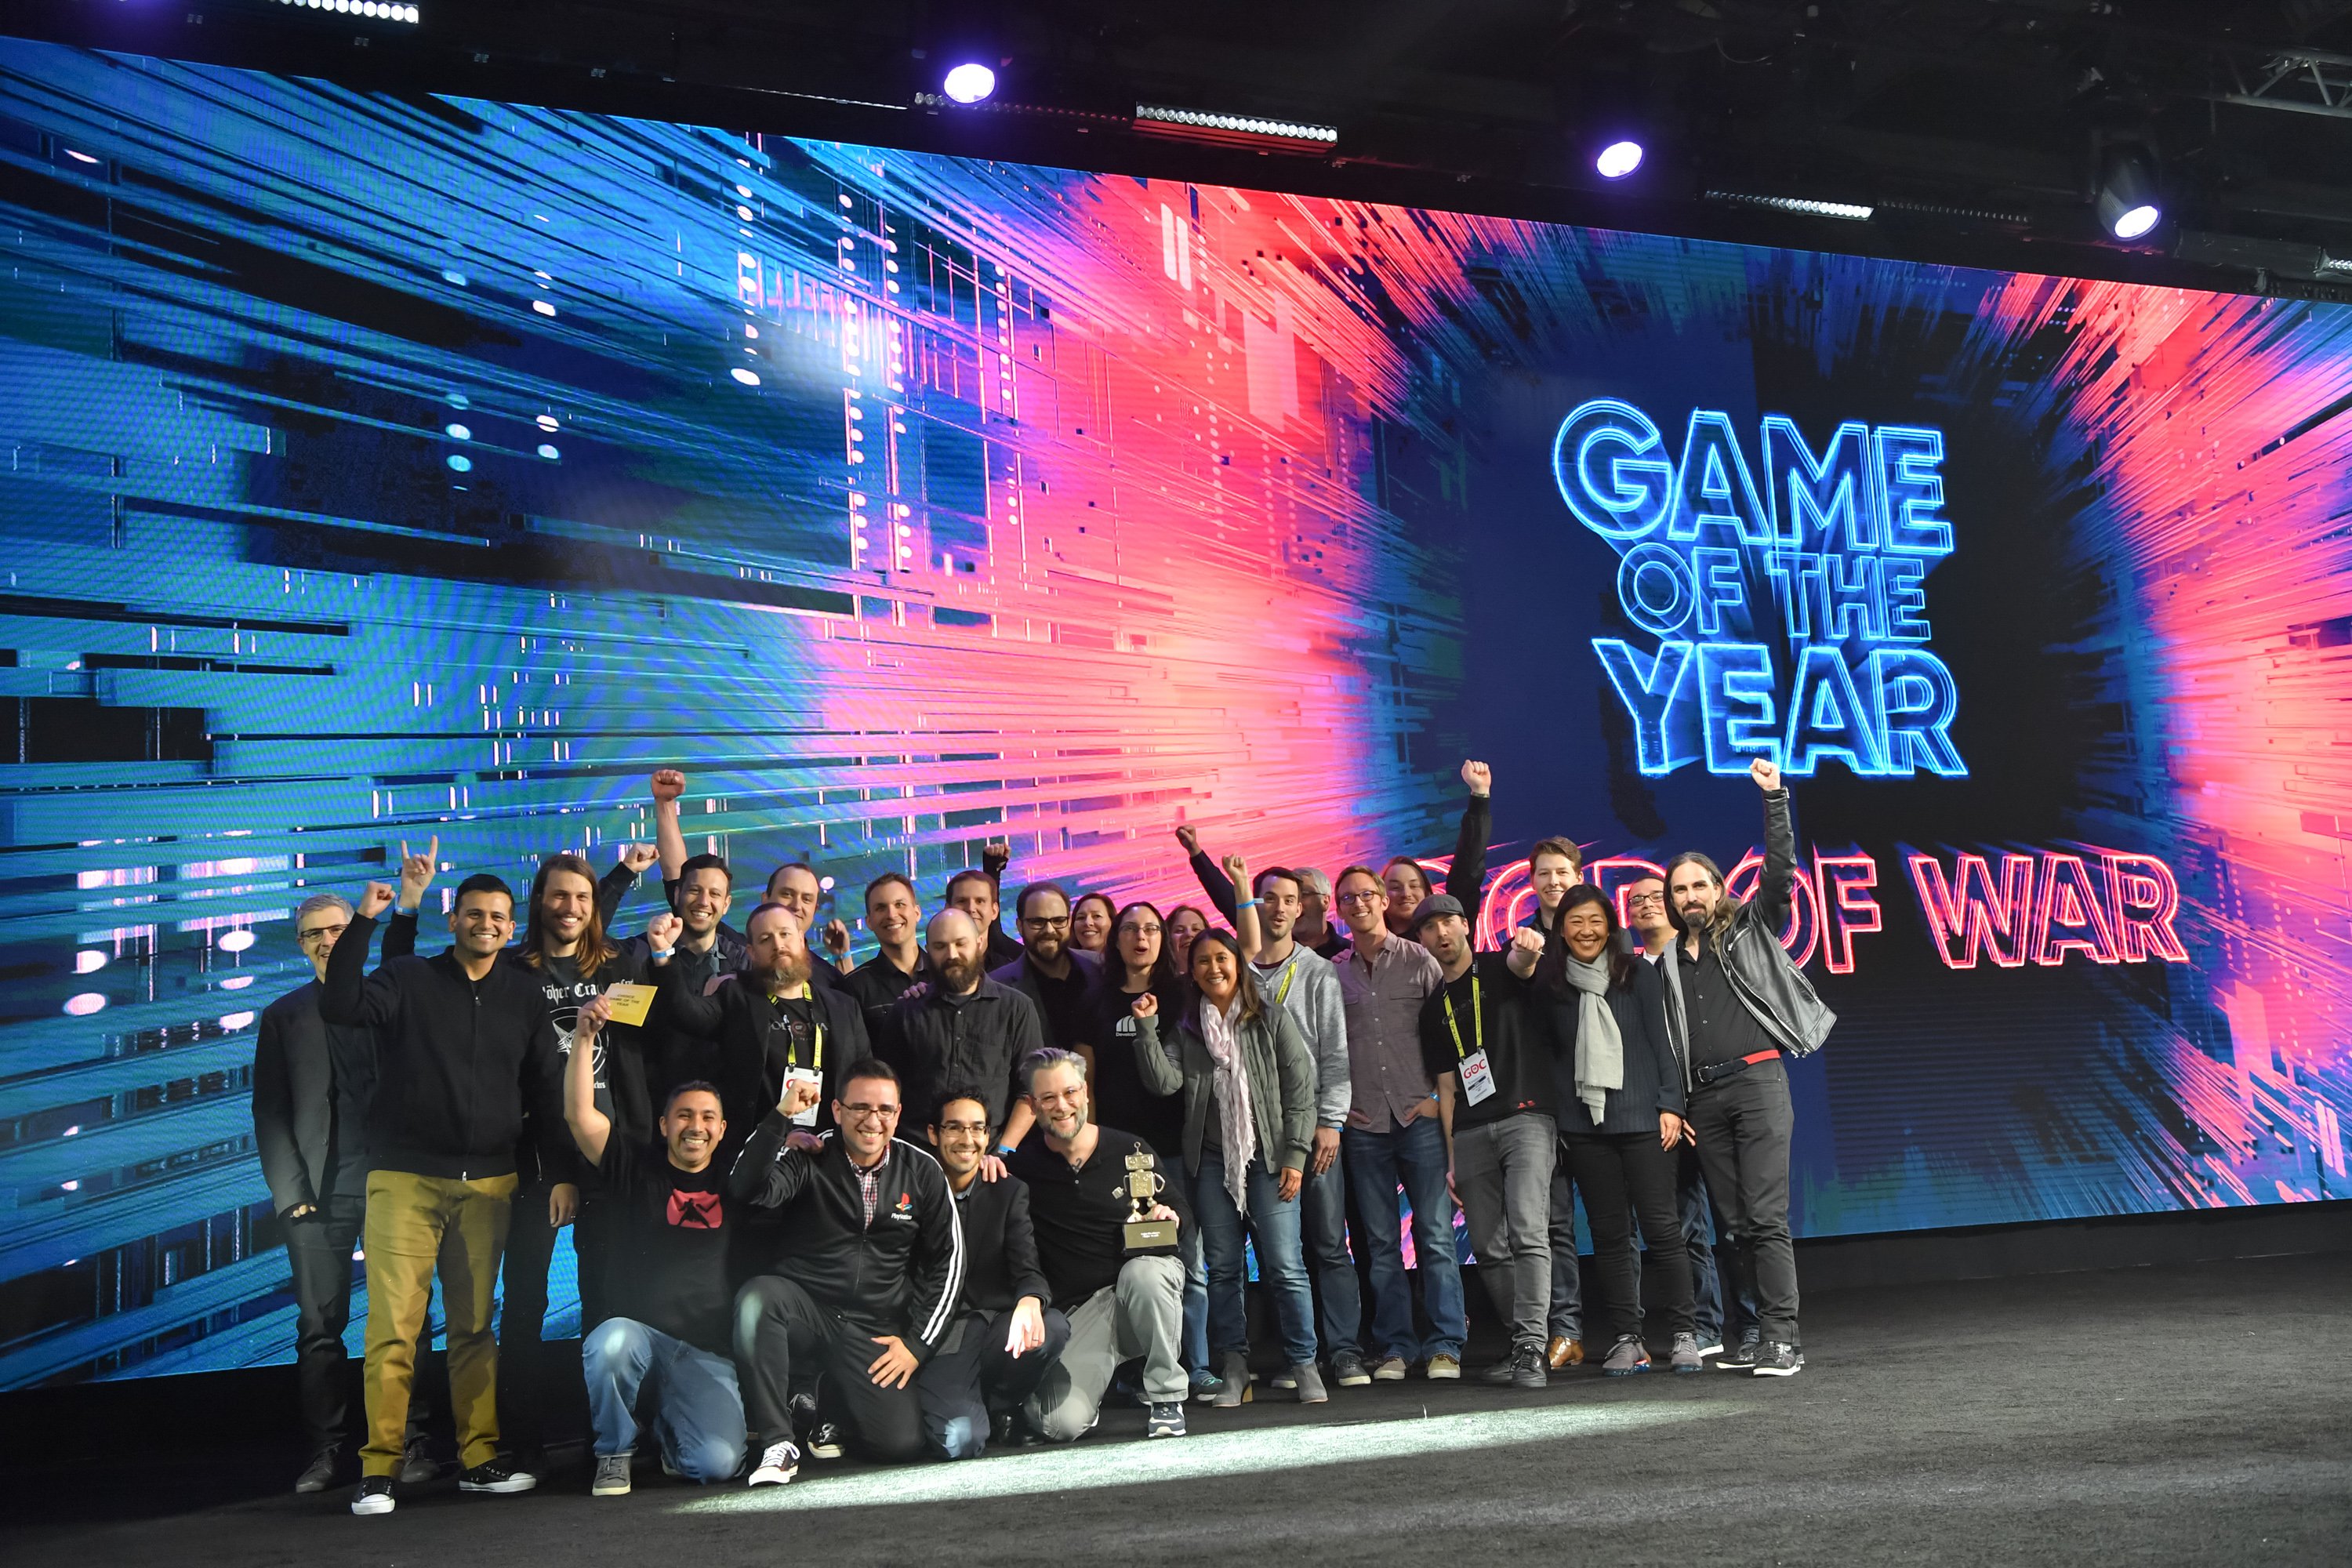 Game Developers Choice Awards